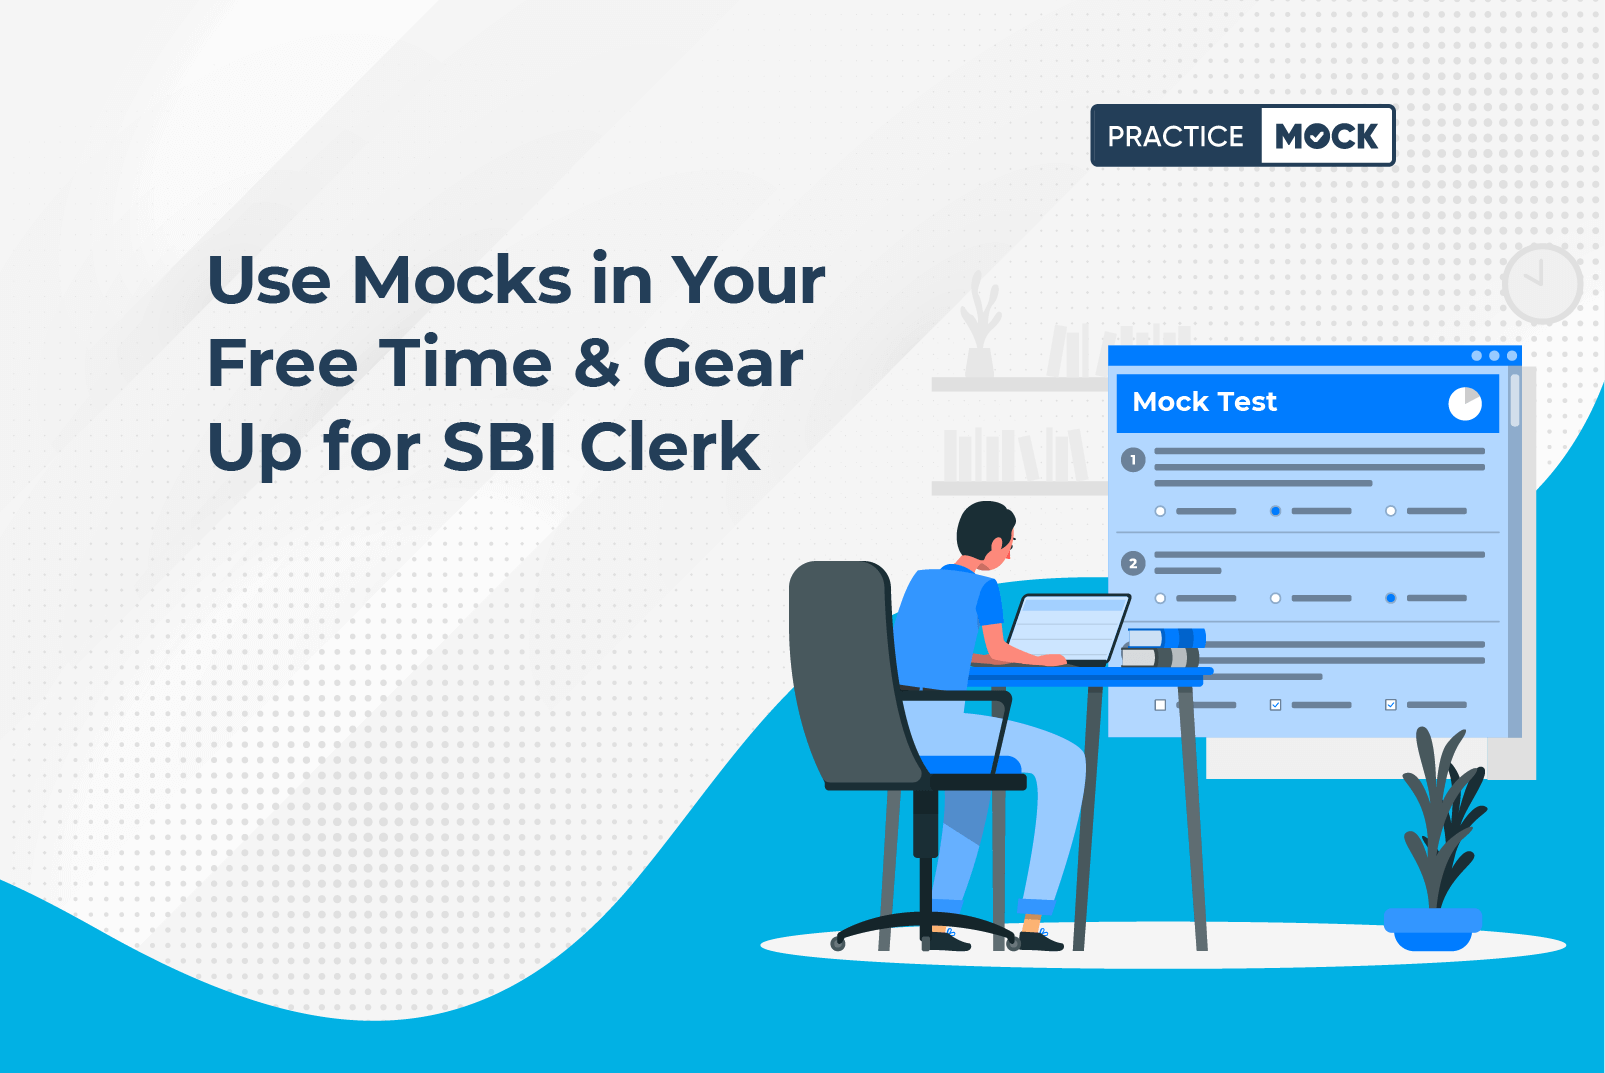 Use Mocks in Your Free Time & Gear Up for SBI Clerk